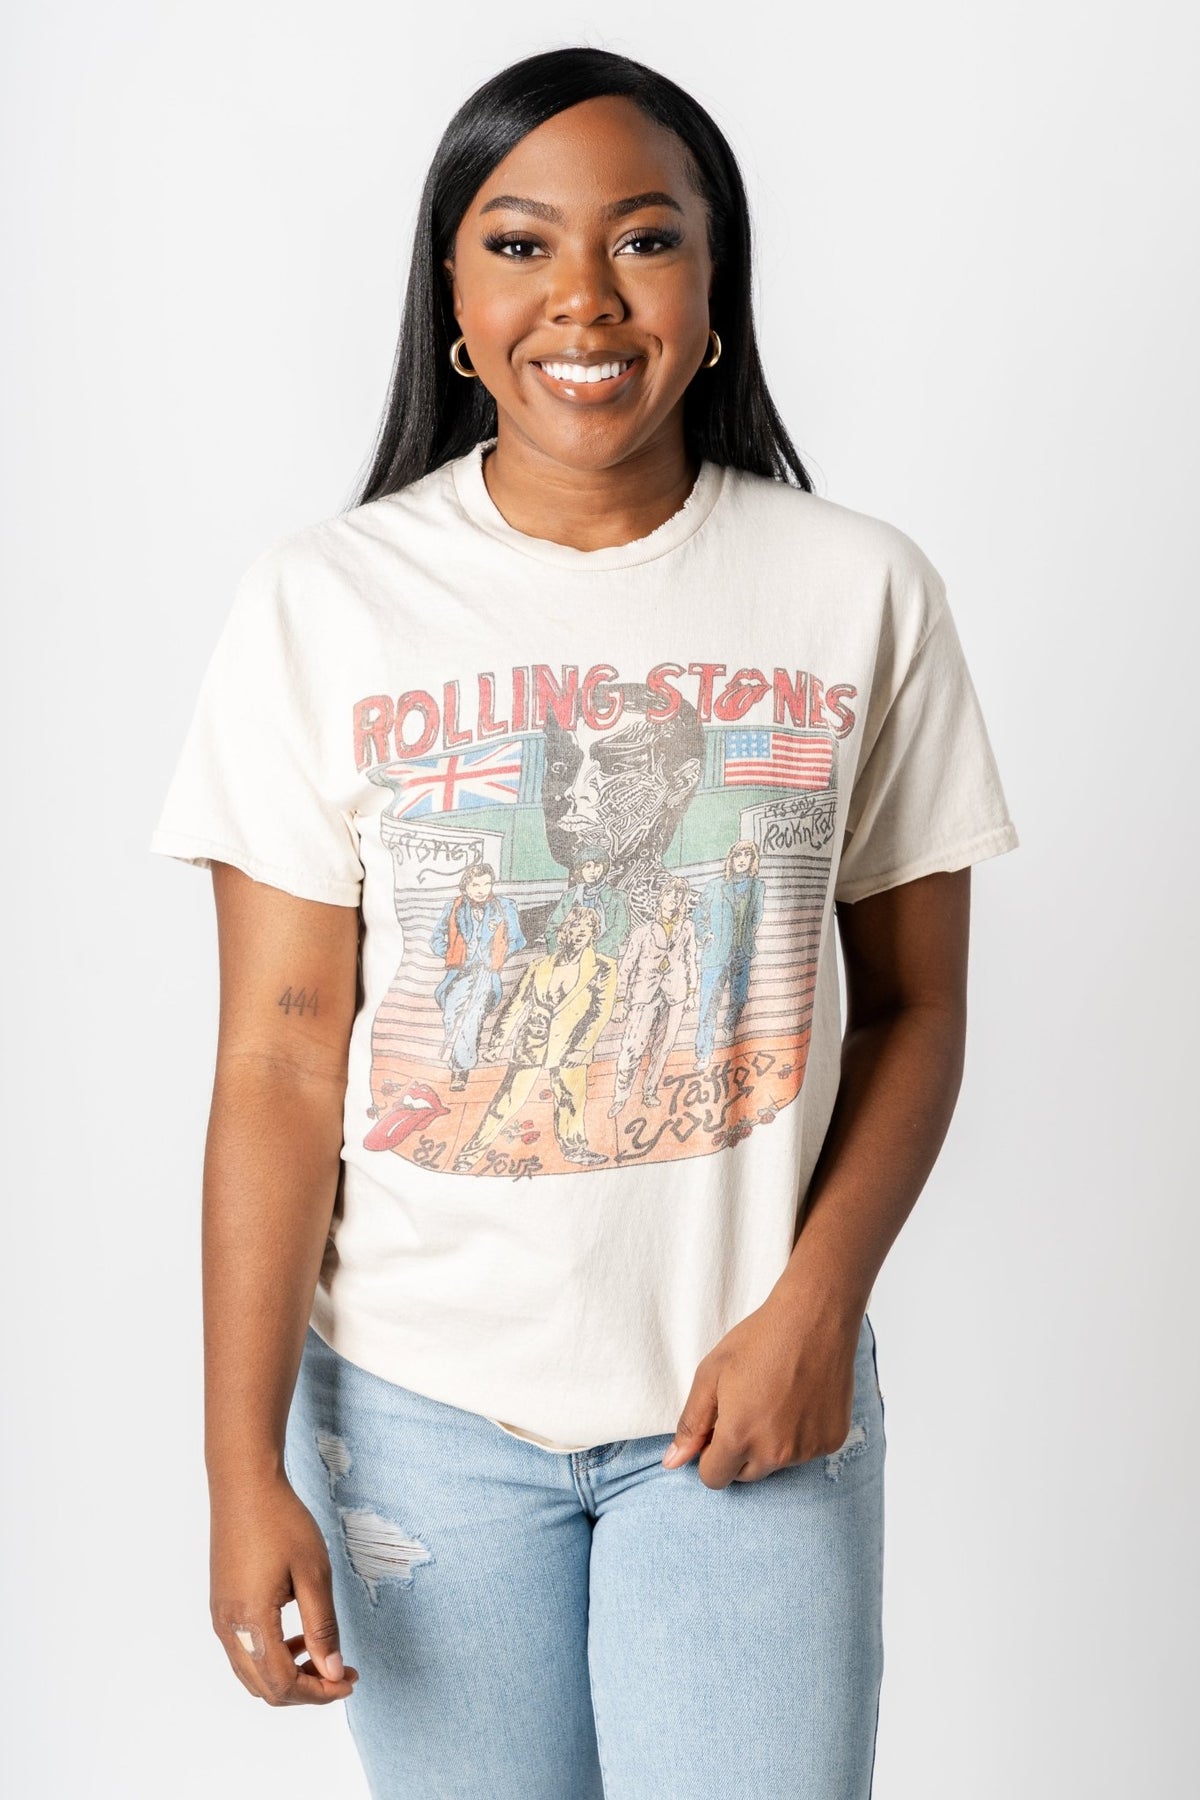 Rolling Stones tattoo you thrifted tee off white - Trendy Band T-Shirts and Sweatshirts at Lush Fashion Lounge Boutique in Oklahoma City